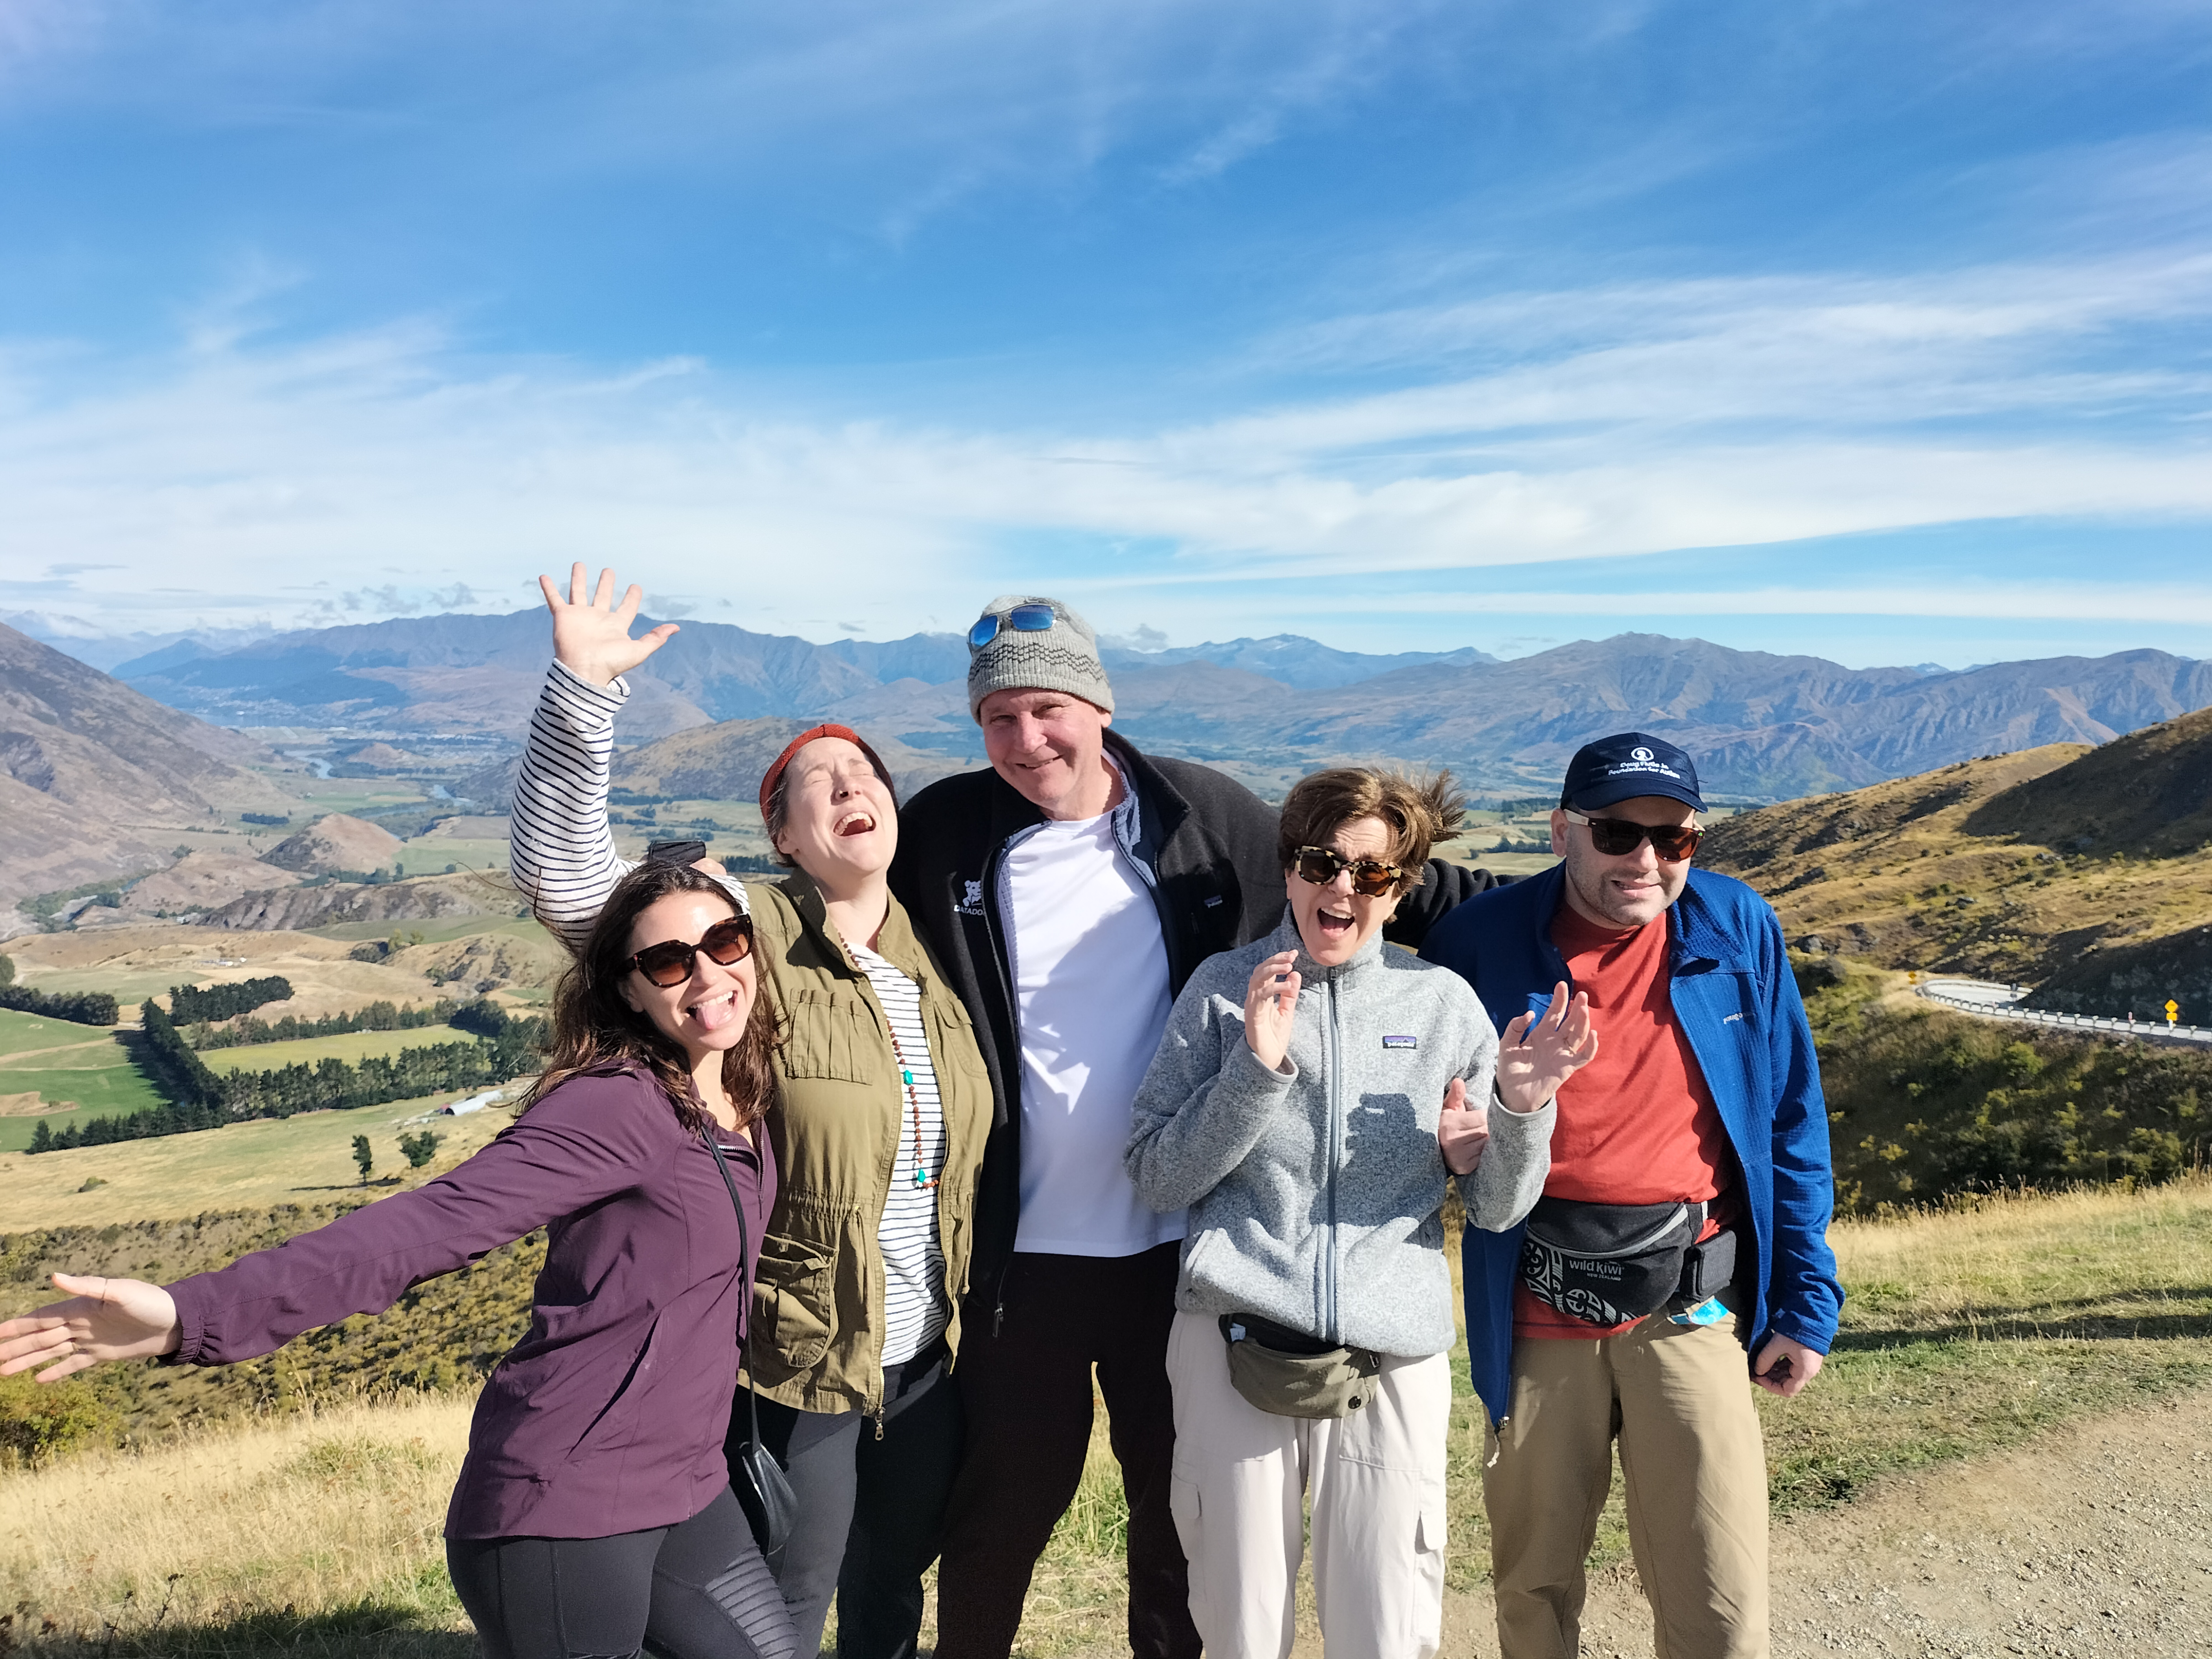 Two week fun-filled tour around the South Island